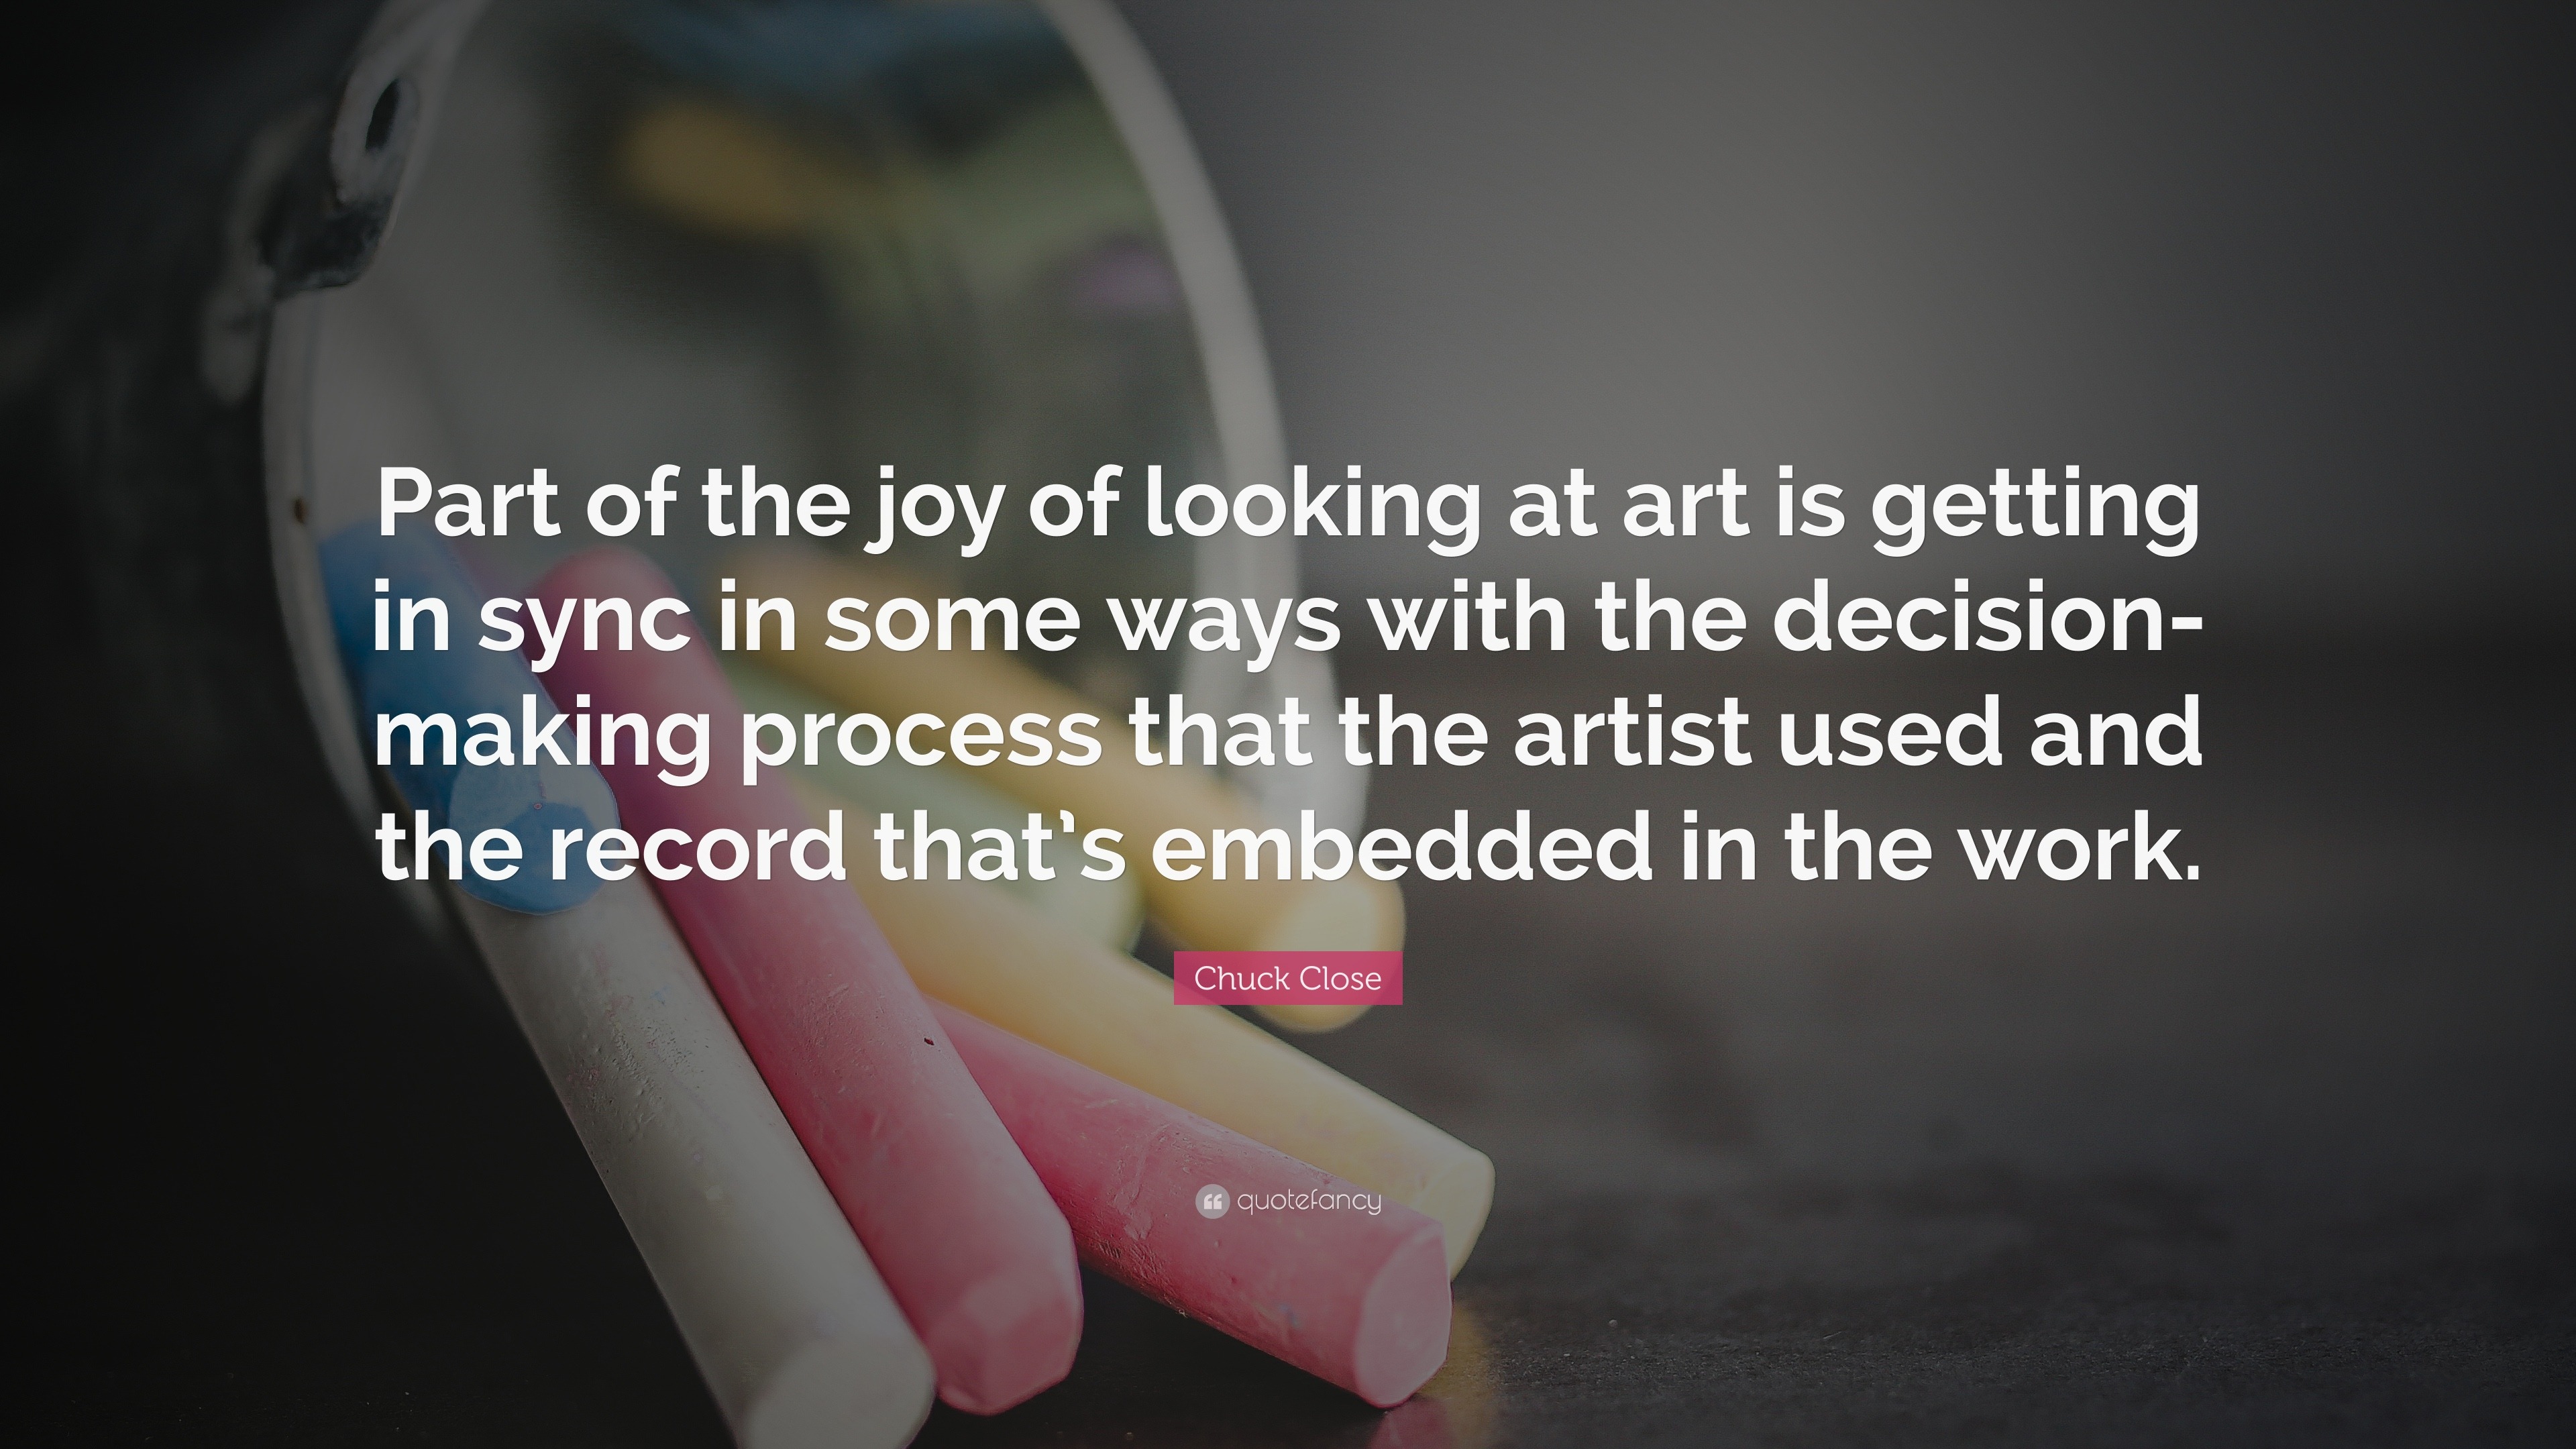 Chuck Close Quote “Part of the joy of looking at art is ting in